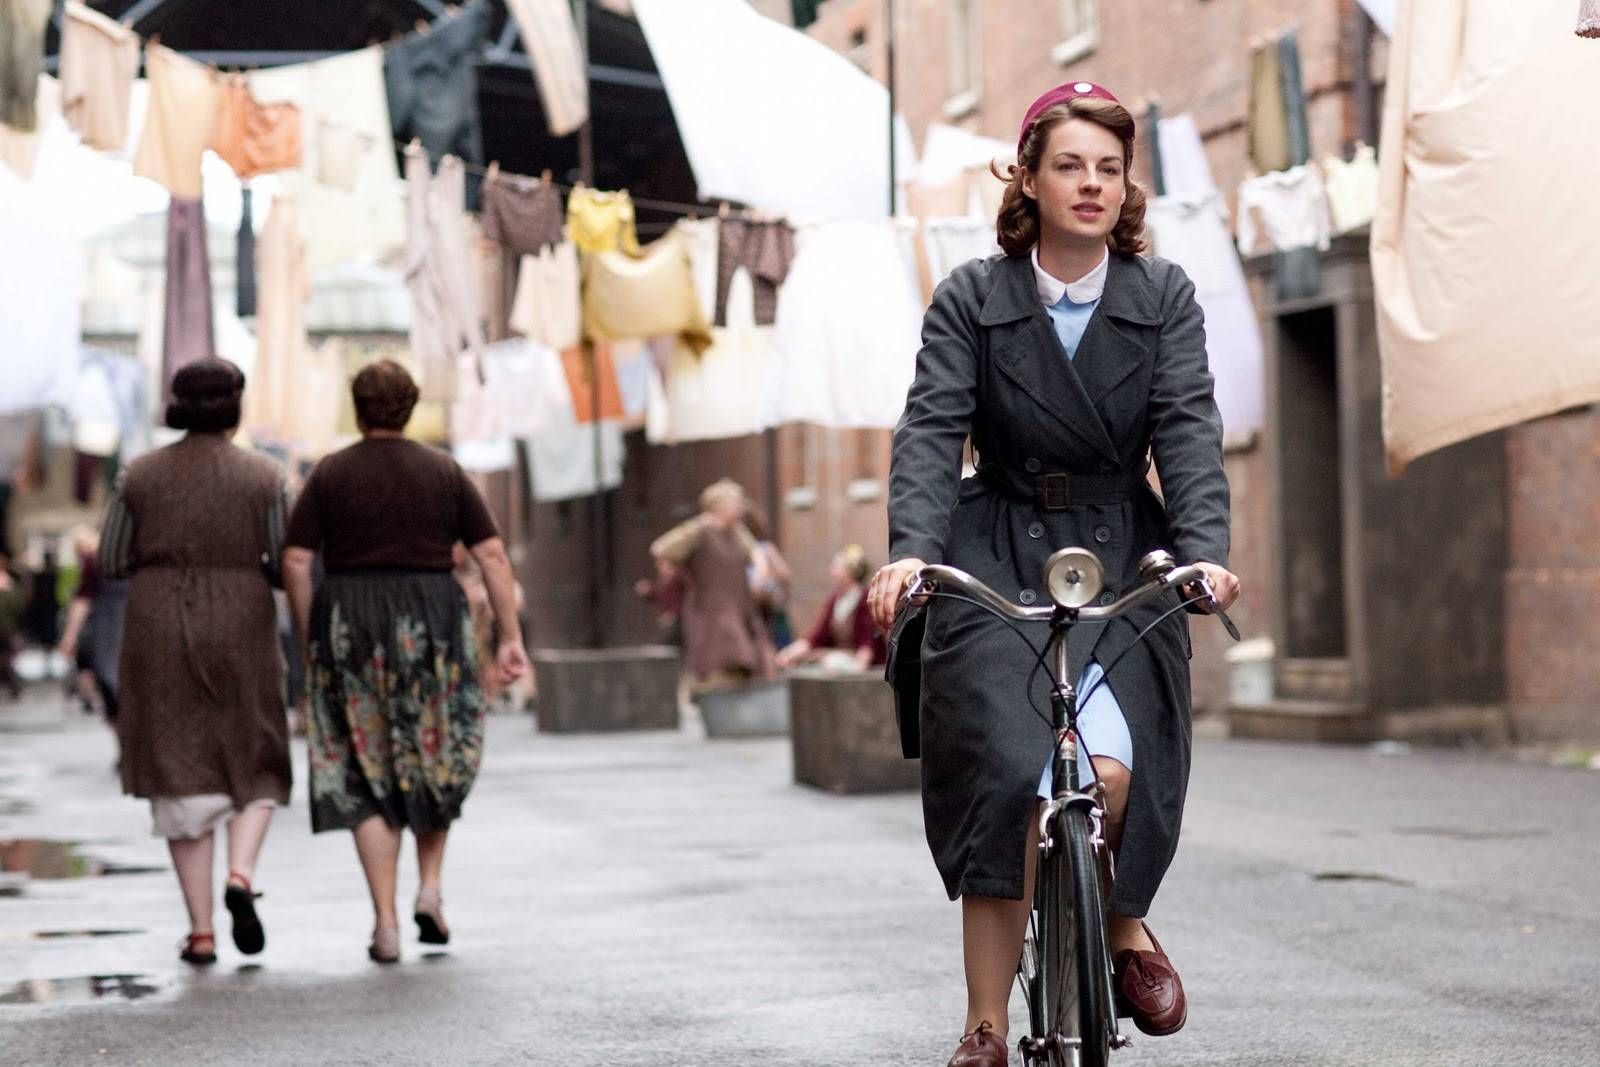 Call the Midwife | What to Read if You Want More British Drama